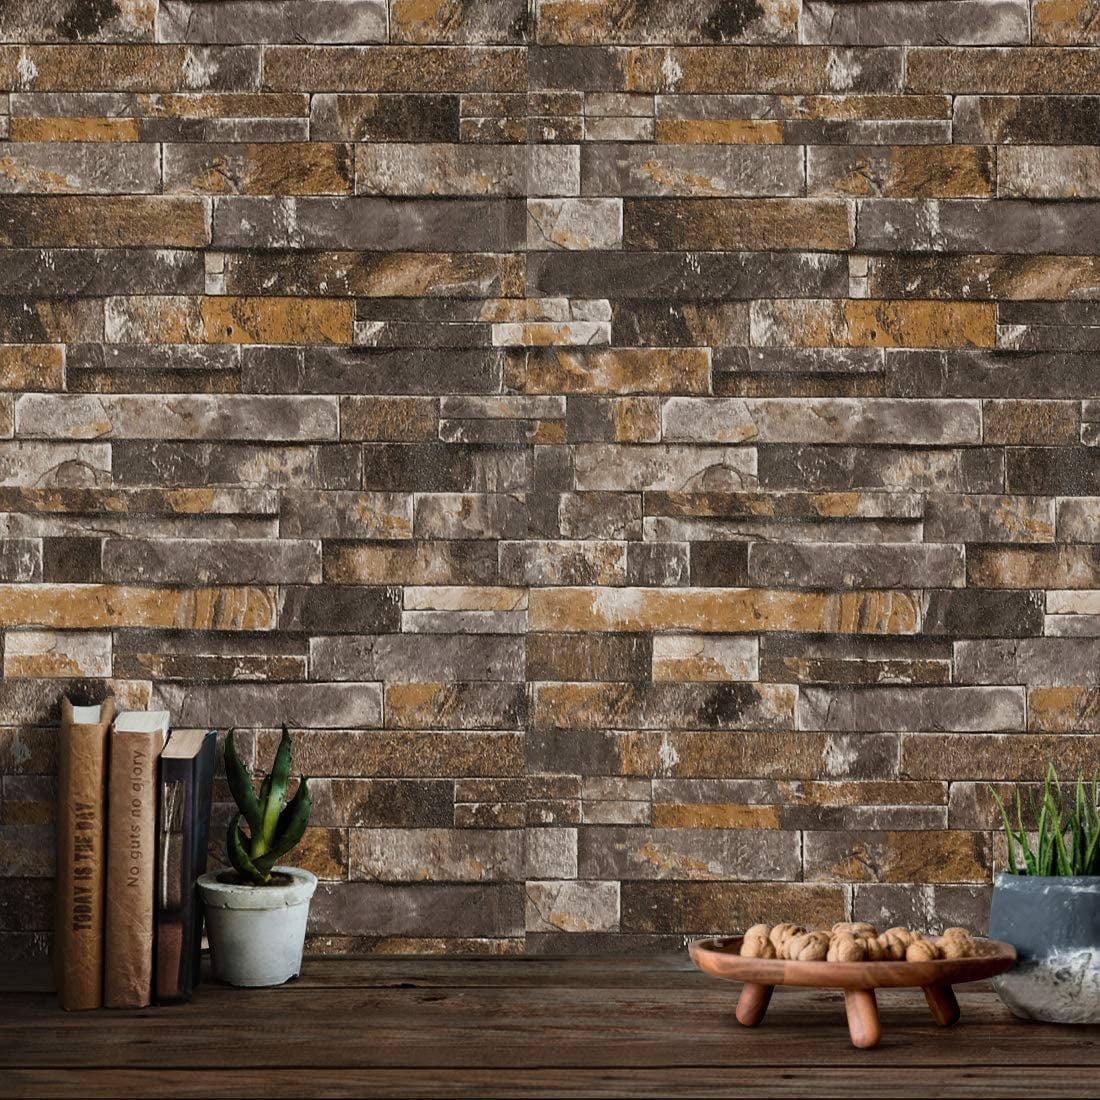 Buy 3D Brick Wallpaper,4Pattern Brick Wall Paper Wall Sticker,Stone  Textured,Waterproof for Home Design and Room Decoration,394x21inchh Online  at Lowest Price in Ubuy Ghana. 456770553